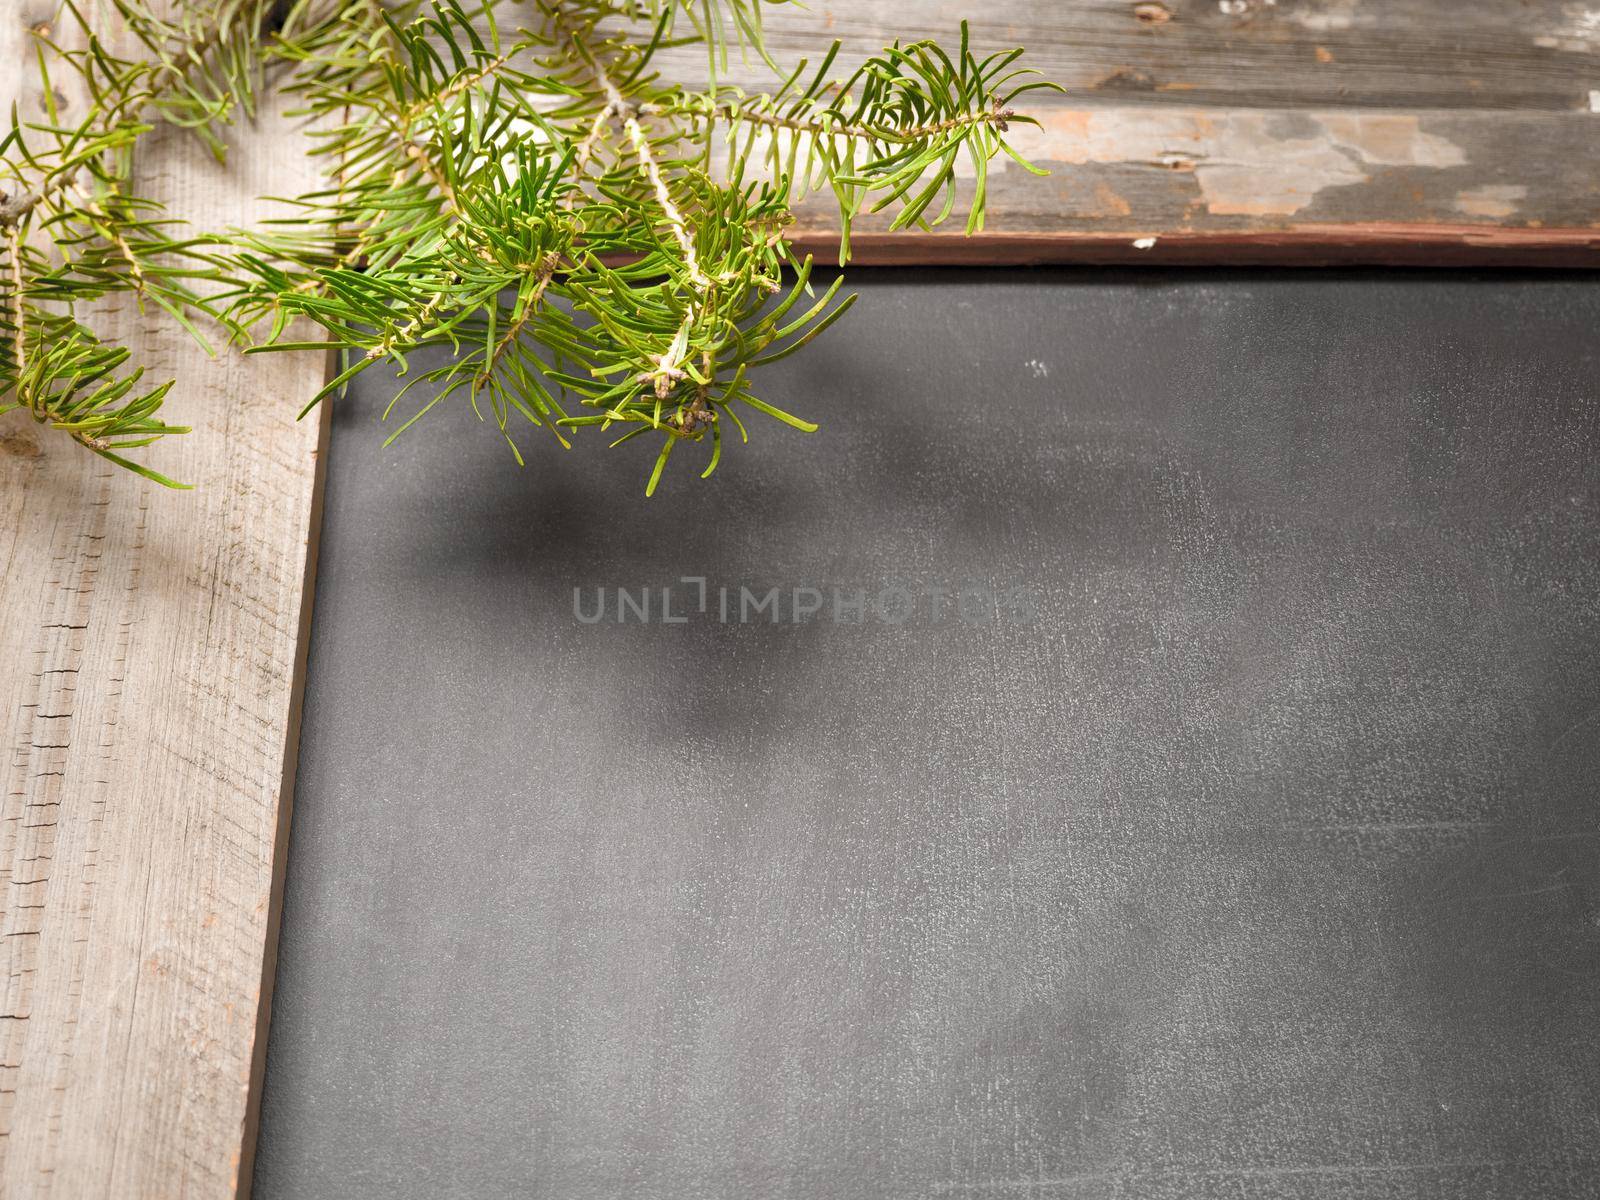 Photograph of distressed wood framed chalkboard with evergreen pine branch and needles hanging in the corner.